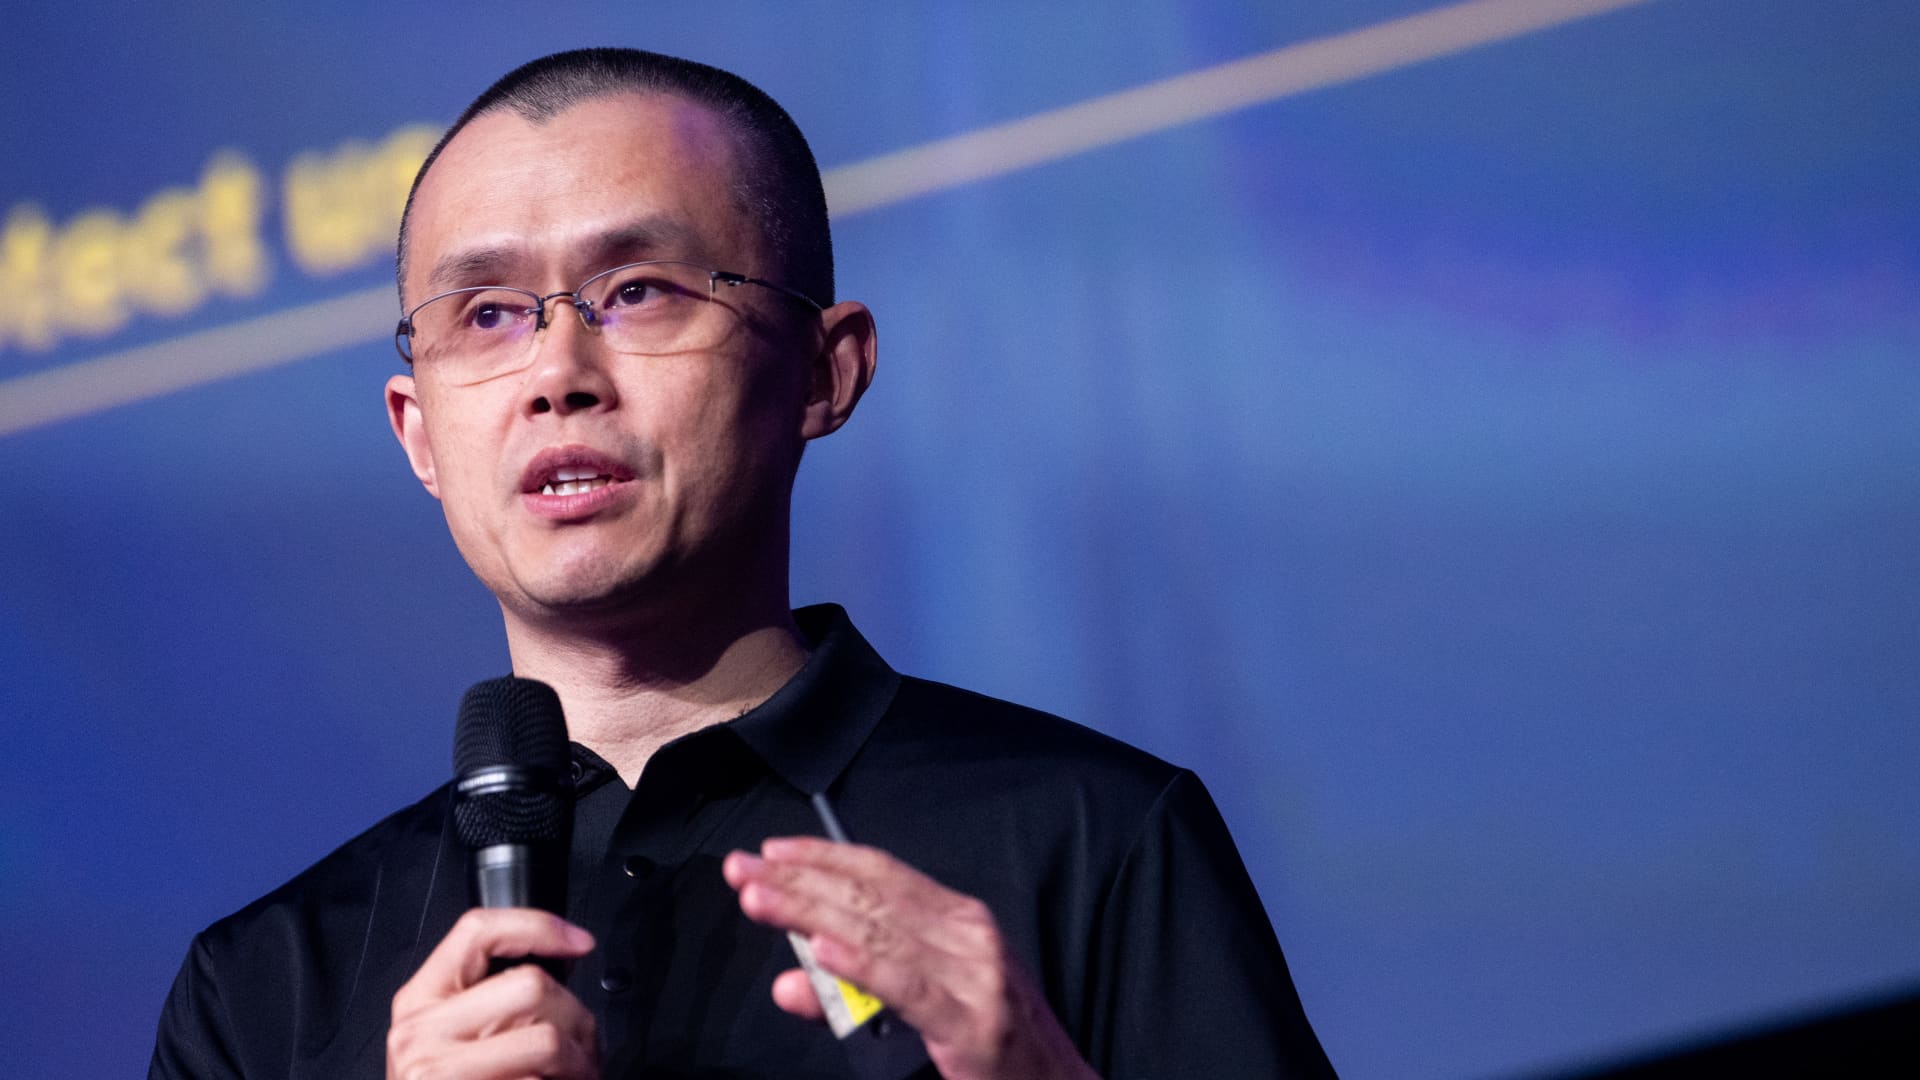 binance founder and ceo changpeng zhao